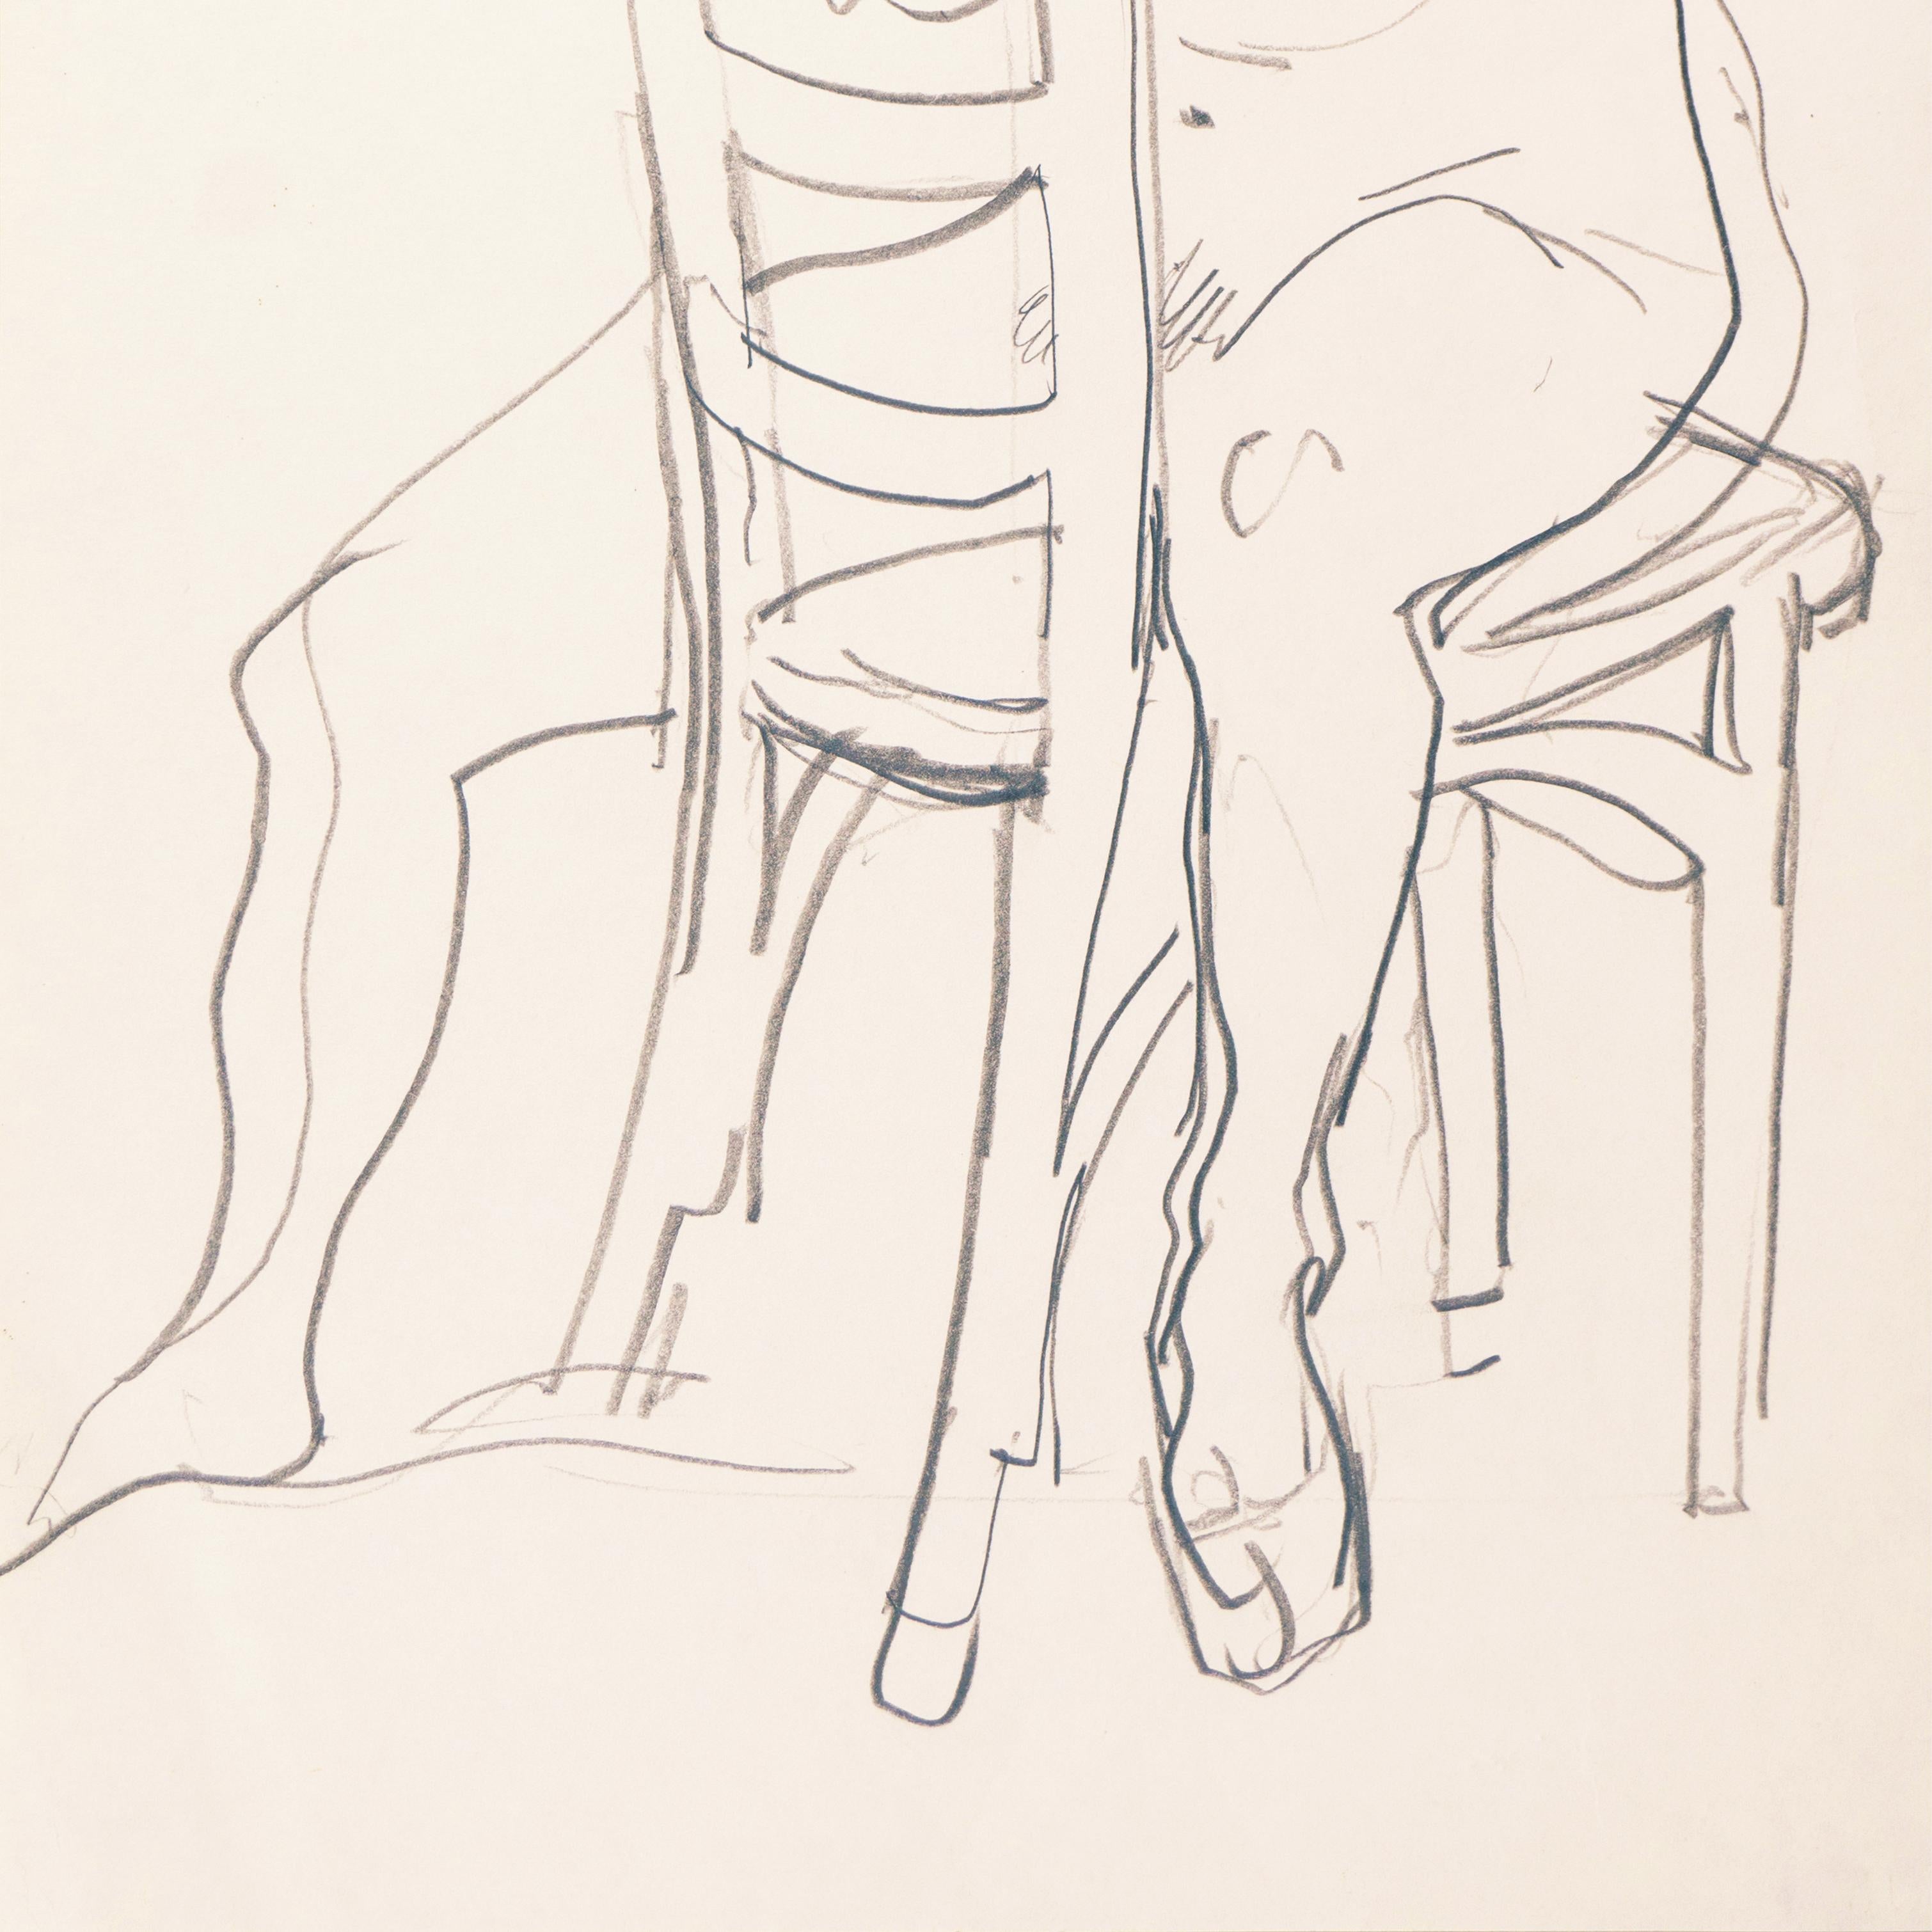 Victor Di Gesu (American, 1914-1988) circa 1955 and stamped, verso, with Victor di Gesu estate stamp.

An elegant figural drawing showing a woman seated, resting her head on her arms crossed over a chairback.  

Winner of the Prix Othon Friesz,